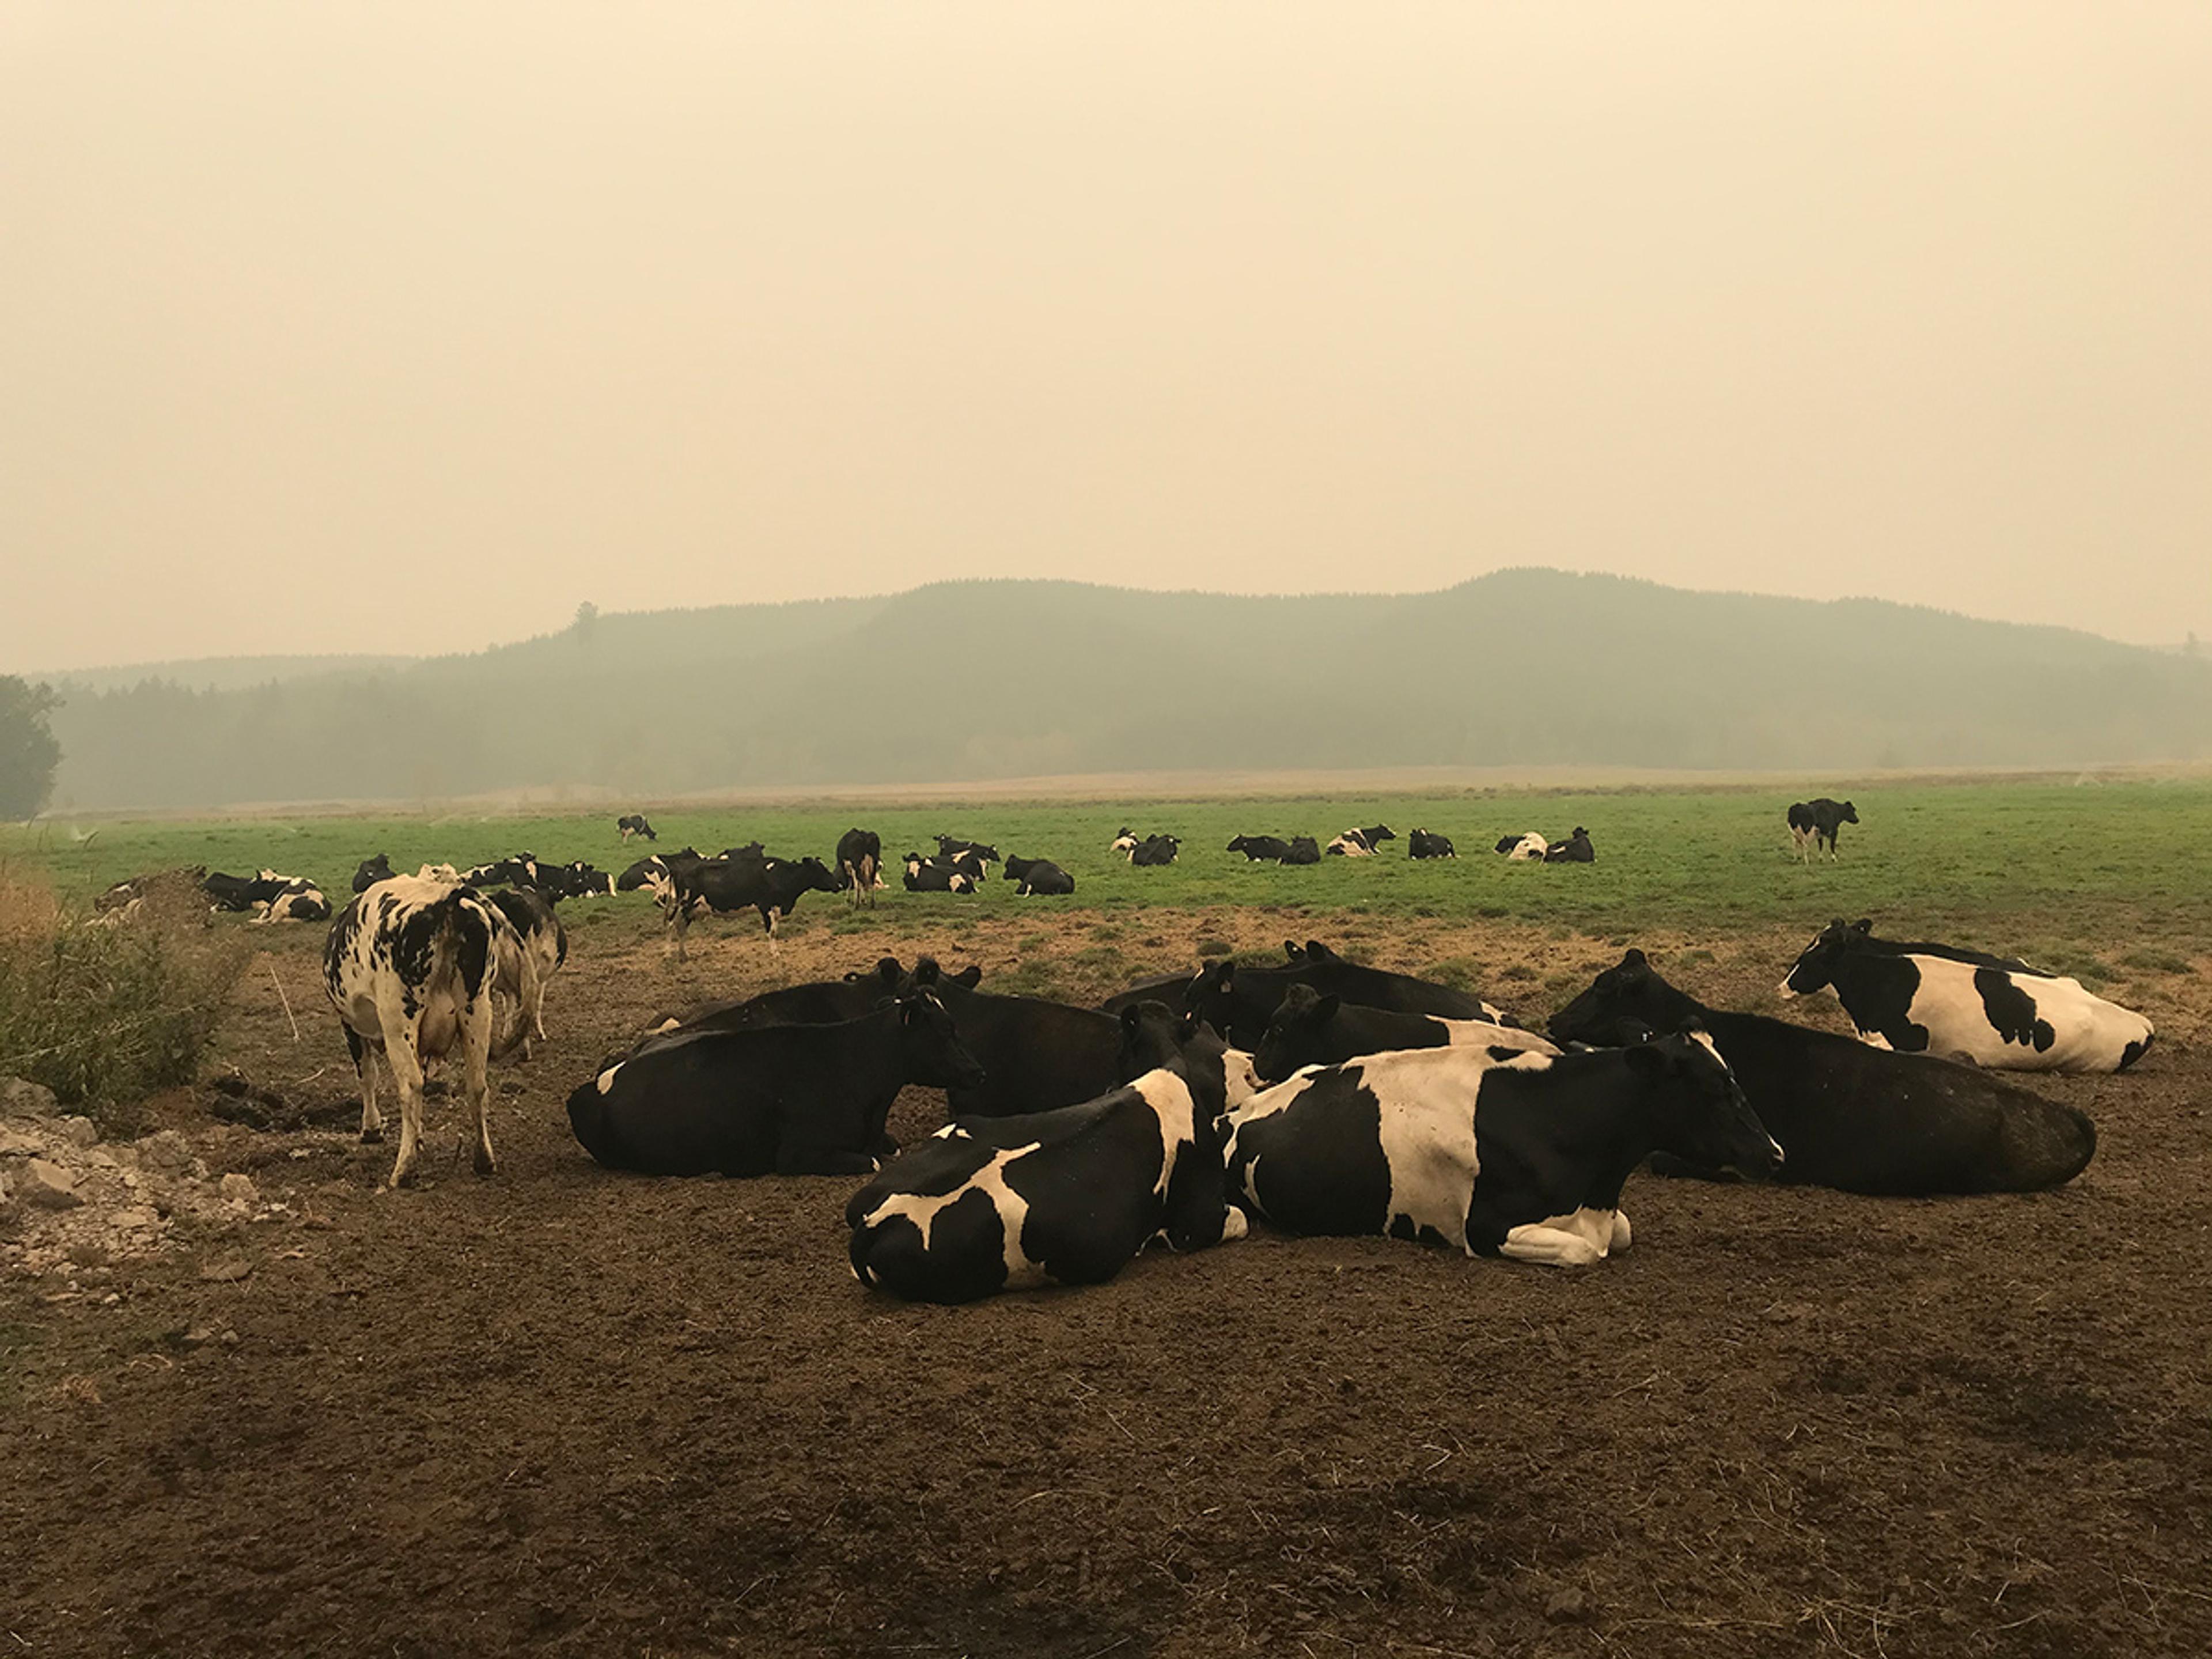 Cows laying down in a pasture that shows poor air quality.